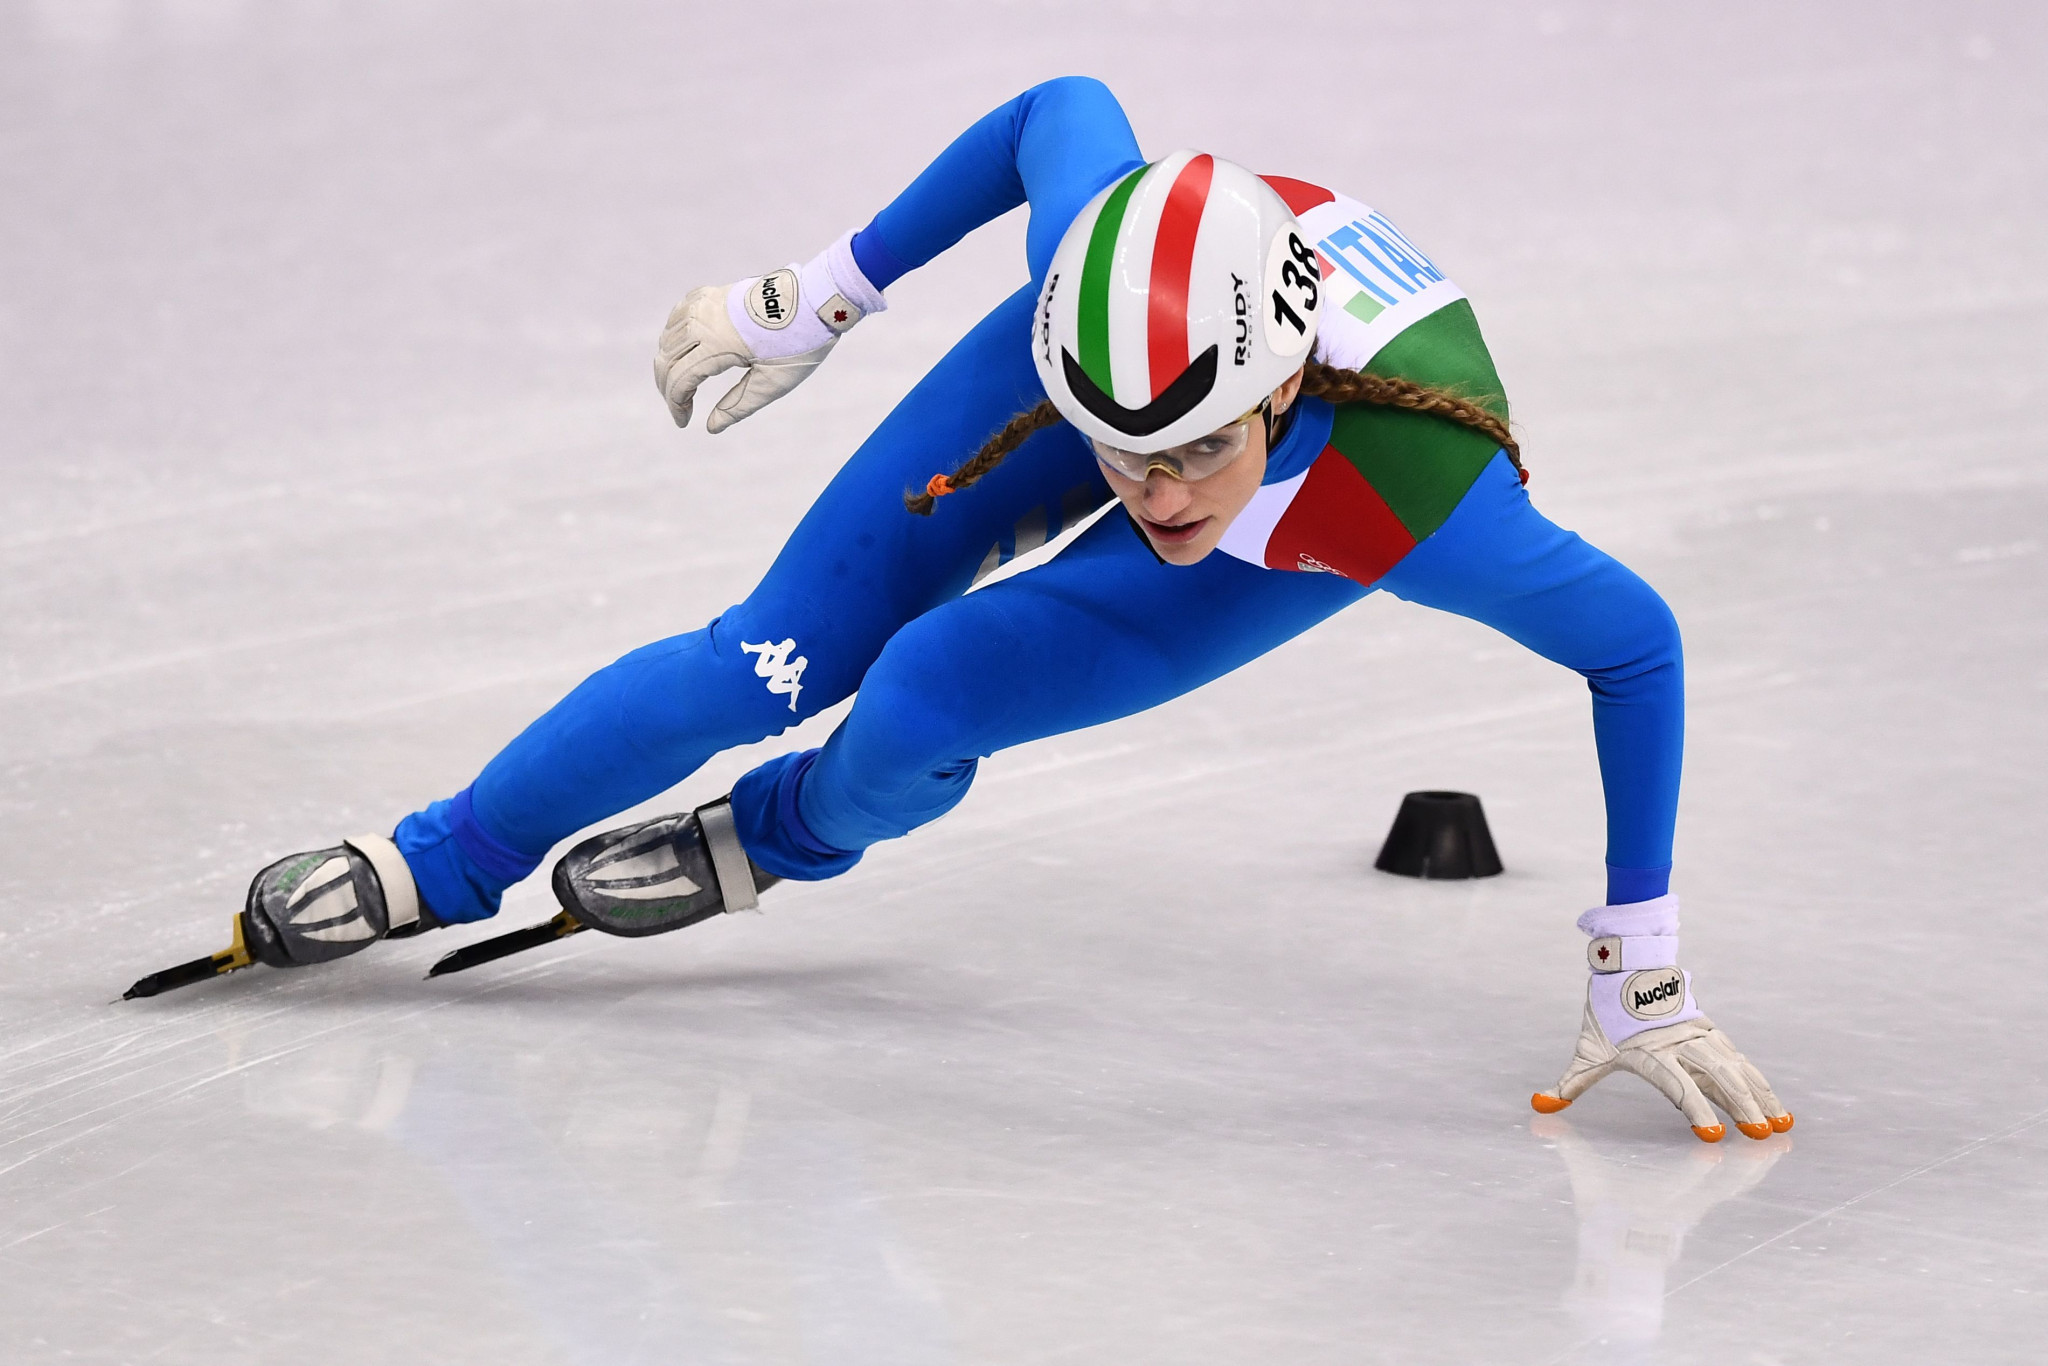 Home favourite Martina Valcepina came out on top in the women’s 500 metres event as action continued today at the ISU Short Track World Cup in Turin ©Getty Images